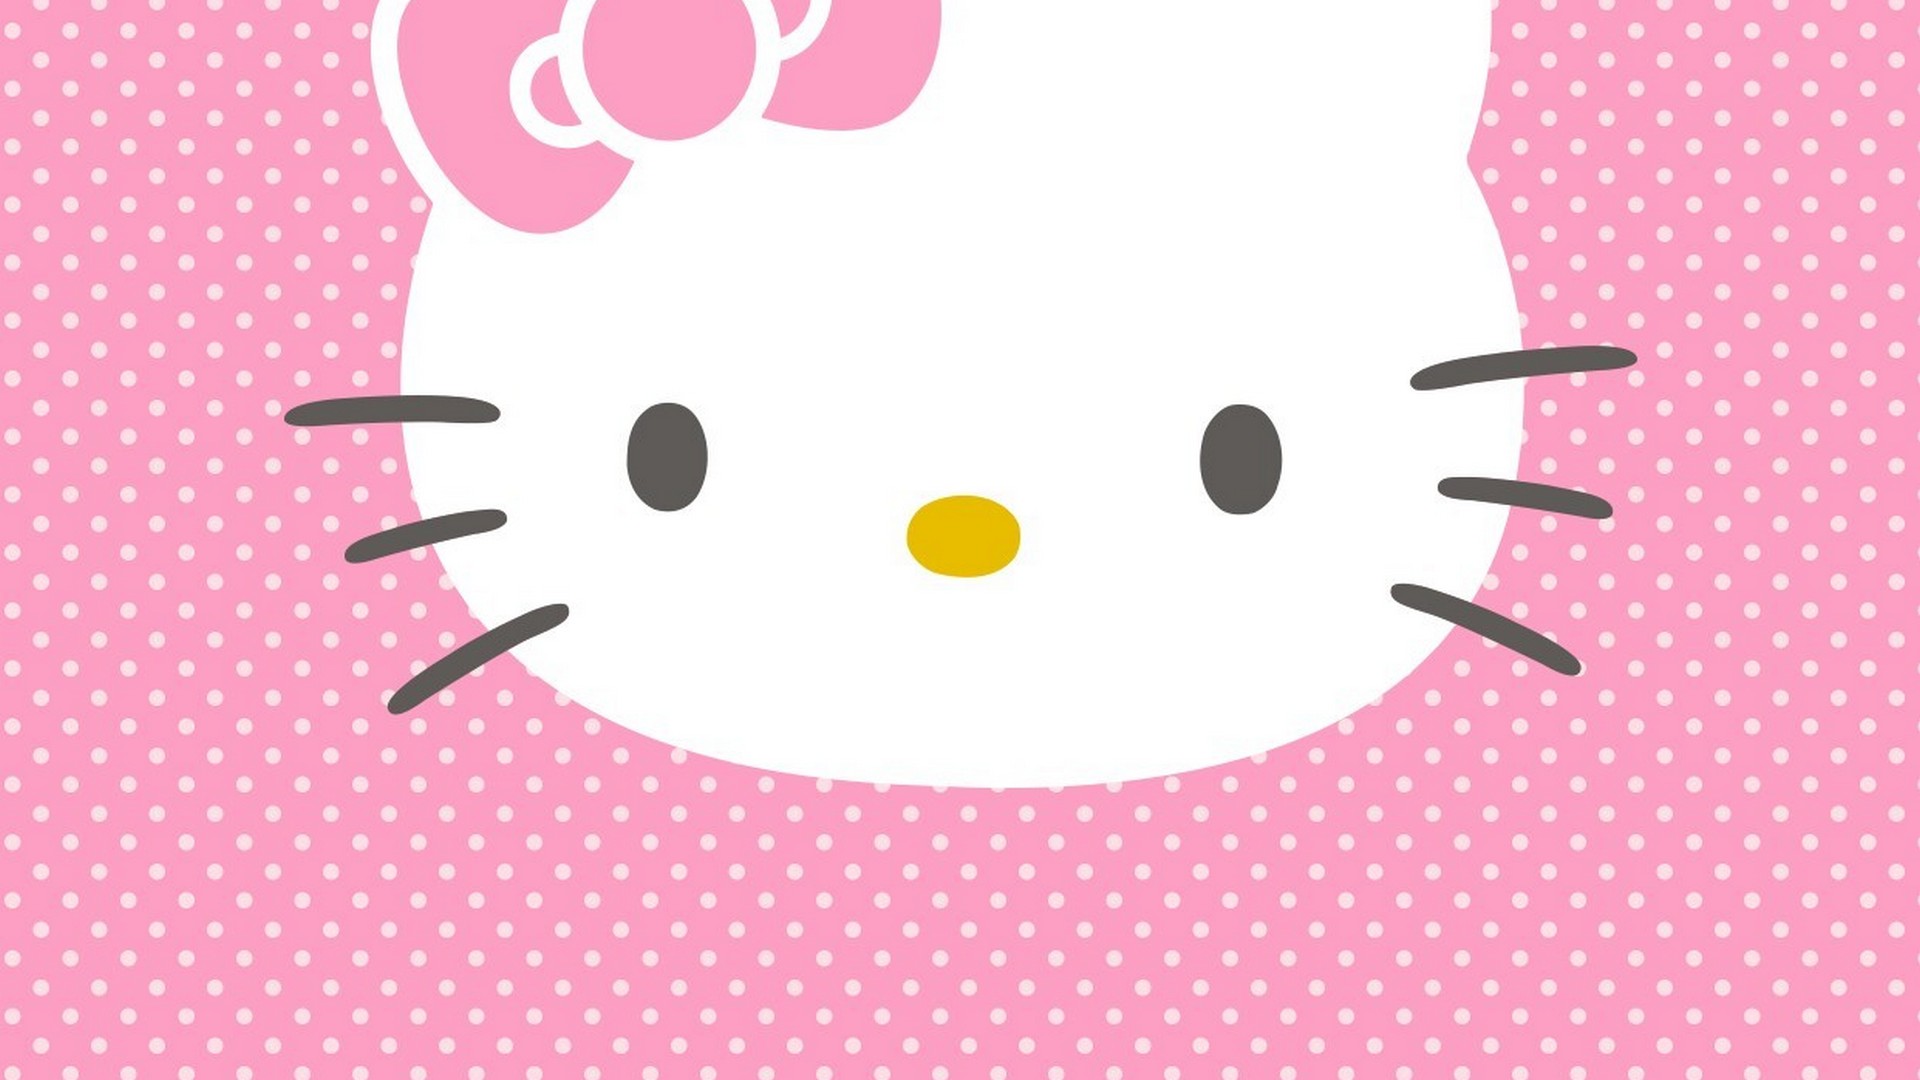 Hello Kitty Pictures Desktop Backgrounds with image resolution 1920x1080 pixel. You can make this wallpaper for your Desktop Computer Backgrounds, Mac Wallpapers, Android Lock screen or iPhone Screensavers